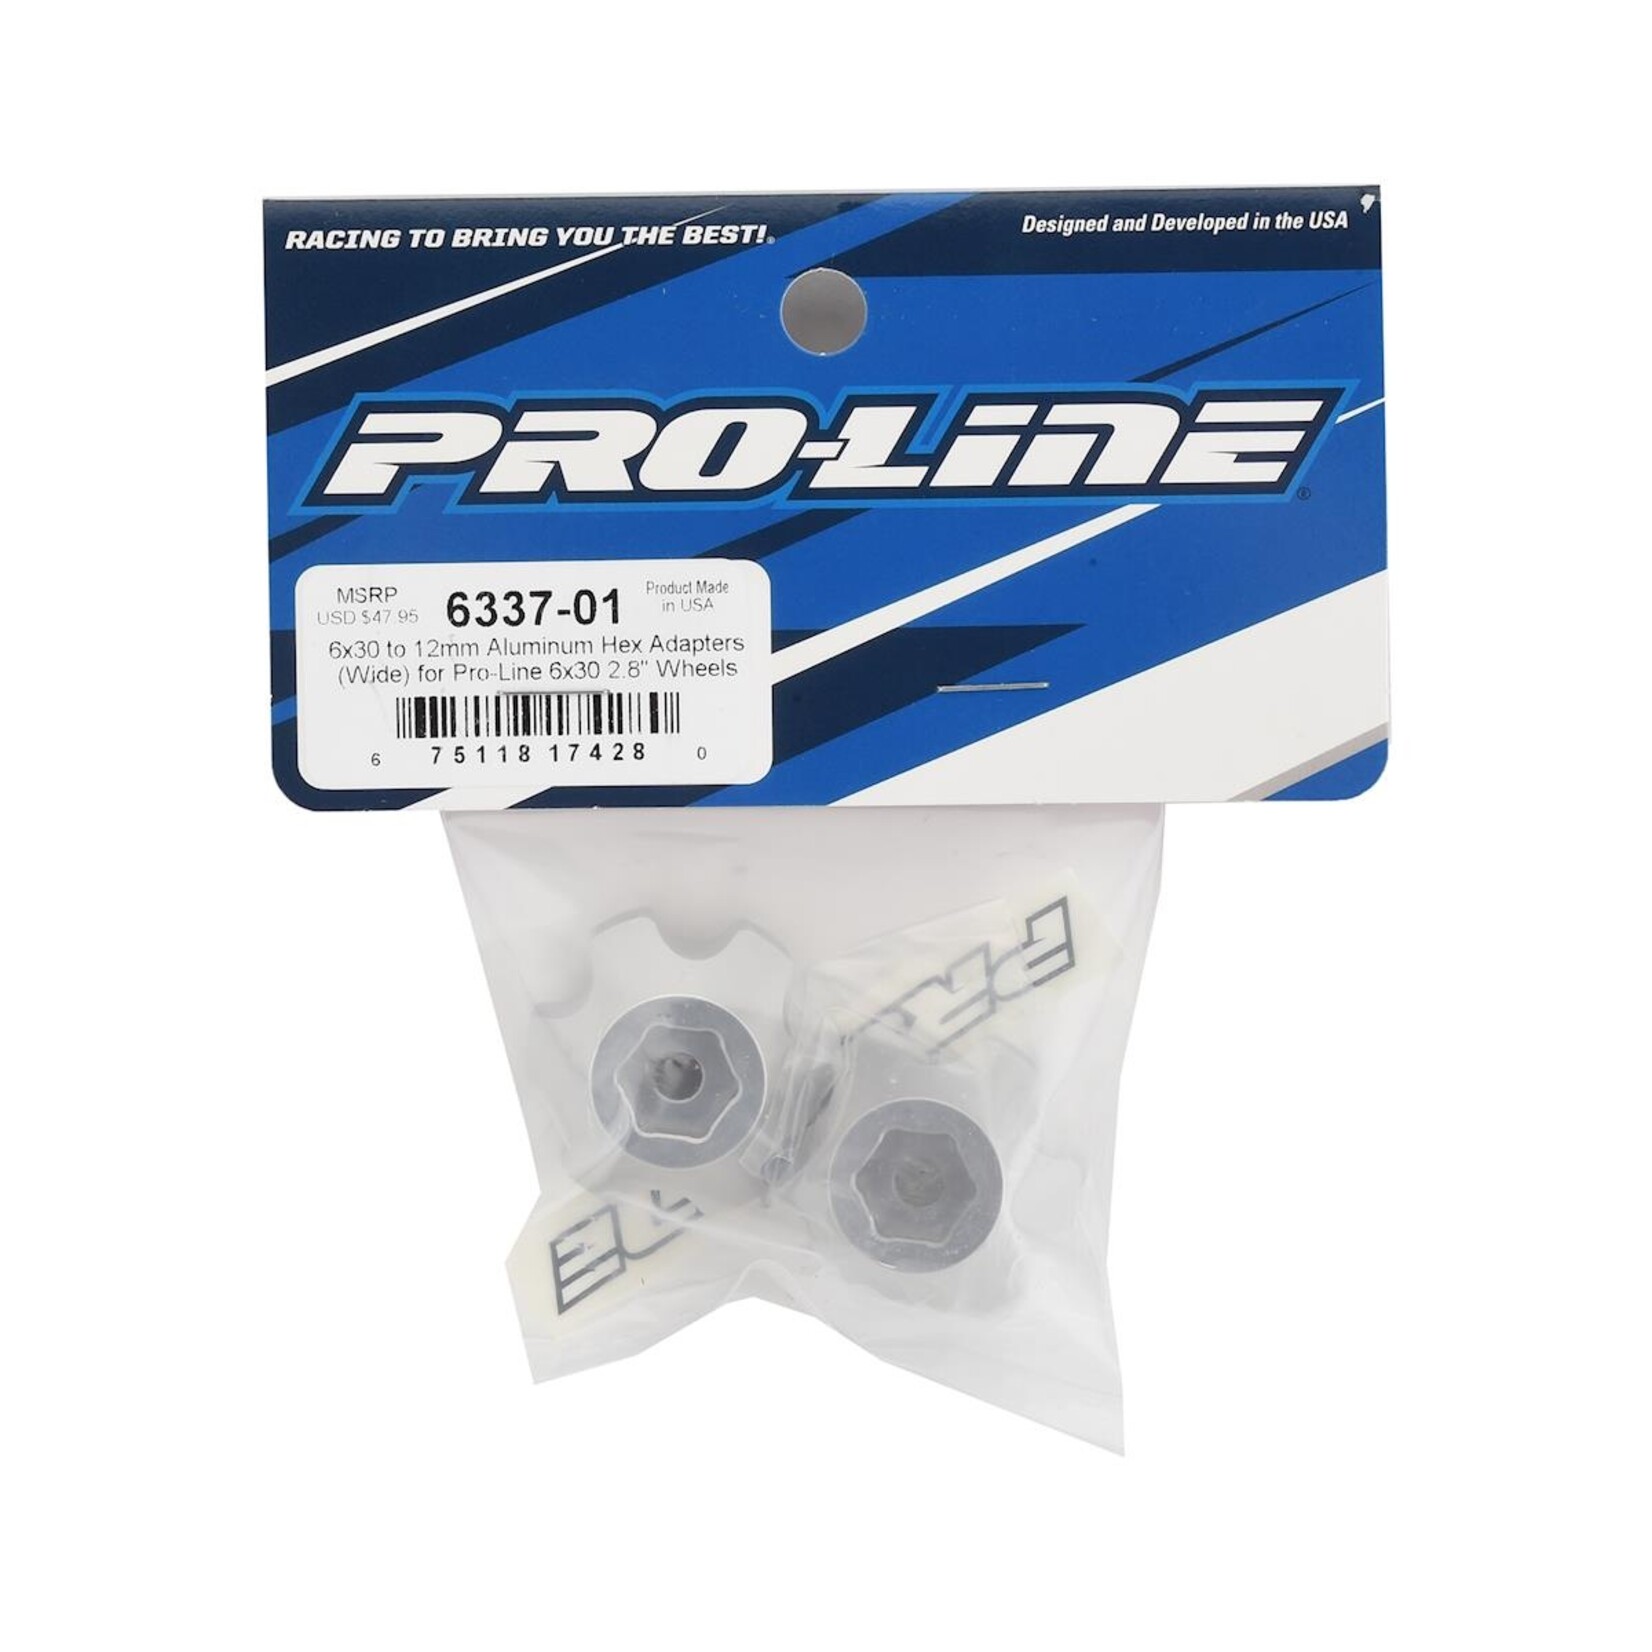 Pro-Line Pro-Line 6x30 to 12mm Aluminum Hex Adapters (2) (Wide) #6337-01